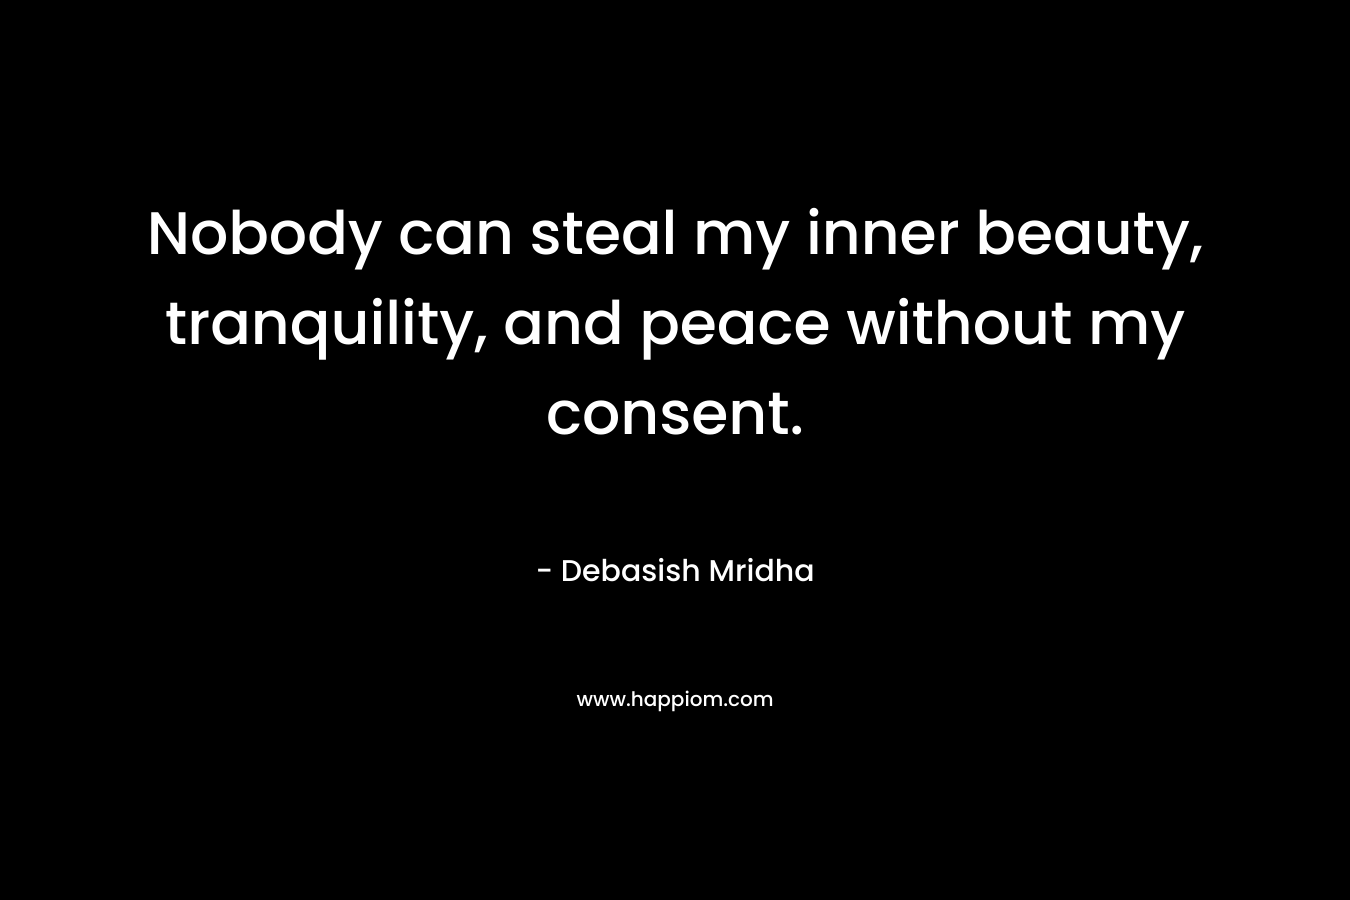 Nobody can steal my inner beauty, tranquility, and peace without my consent.